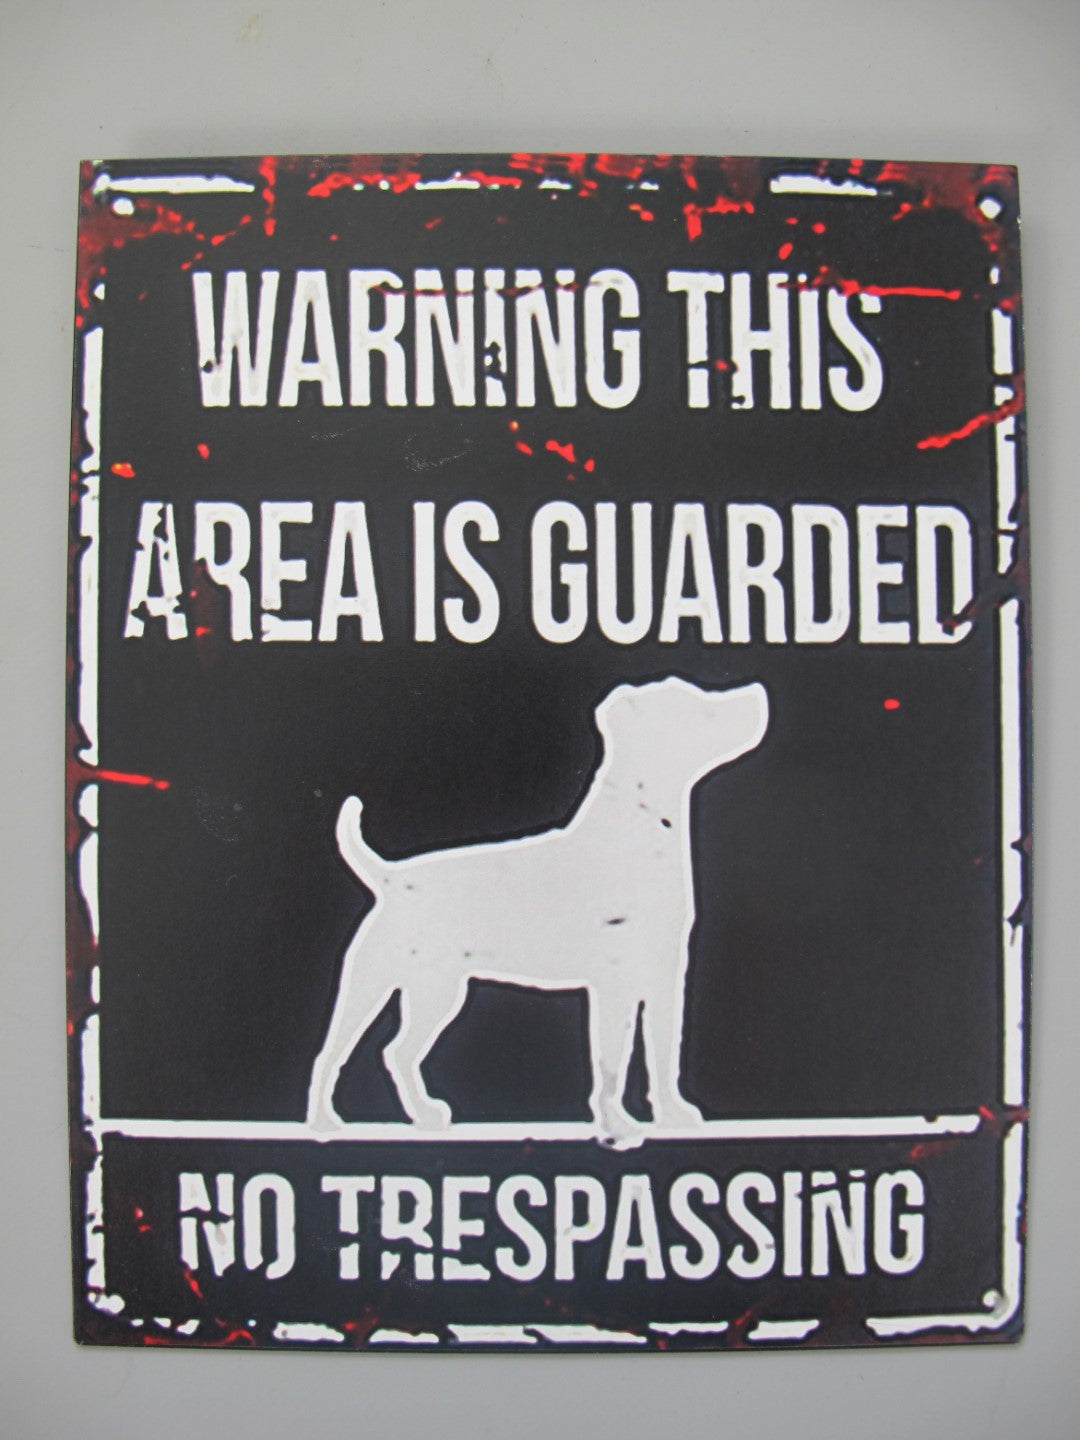 Wandschild mit Hundemotiv  , Blech ca .25 cm  x 20 cm  "Warning. This area is guarded. No trespassing" - British Moments